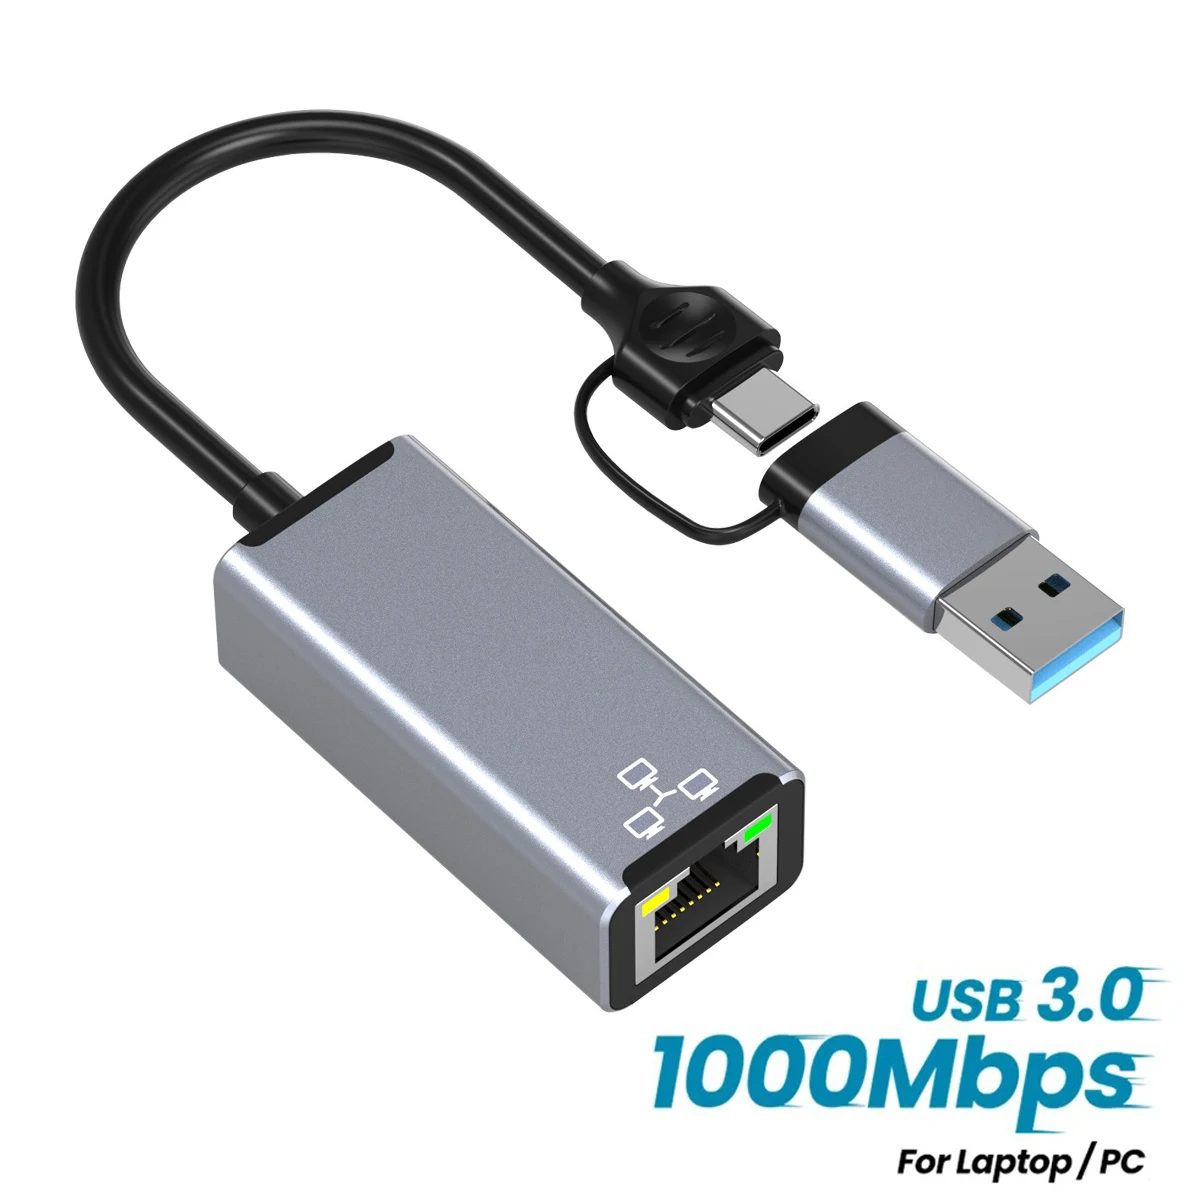 

2-IN-1 1000Mbps Wired Network Card USB 3.0 to RJ45 Type C to RJ45 Network Card LAN Ethernet Adapter Gigabit Ethernet Adapter